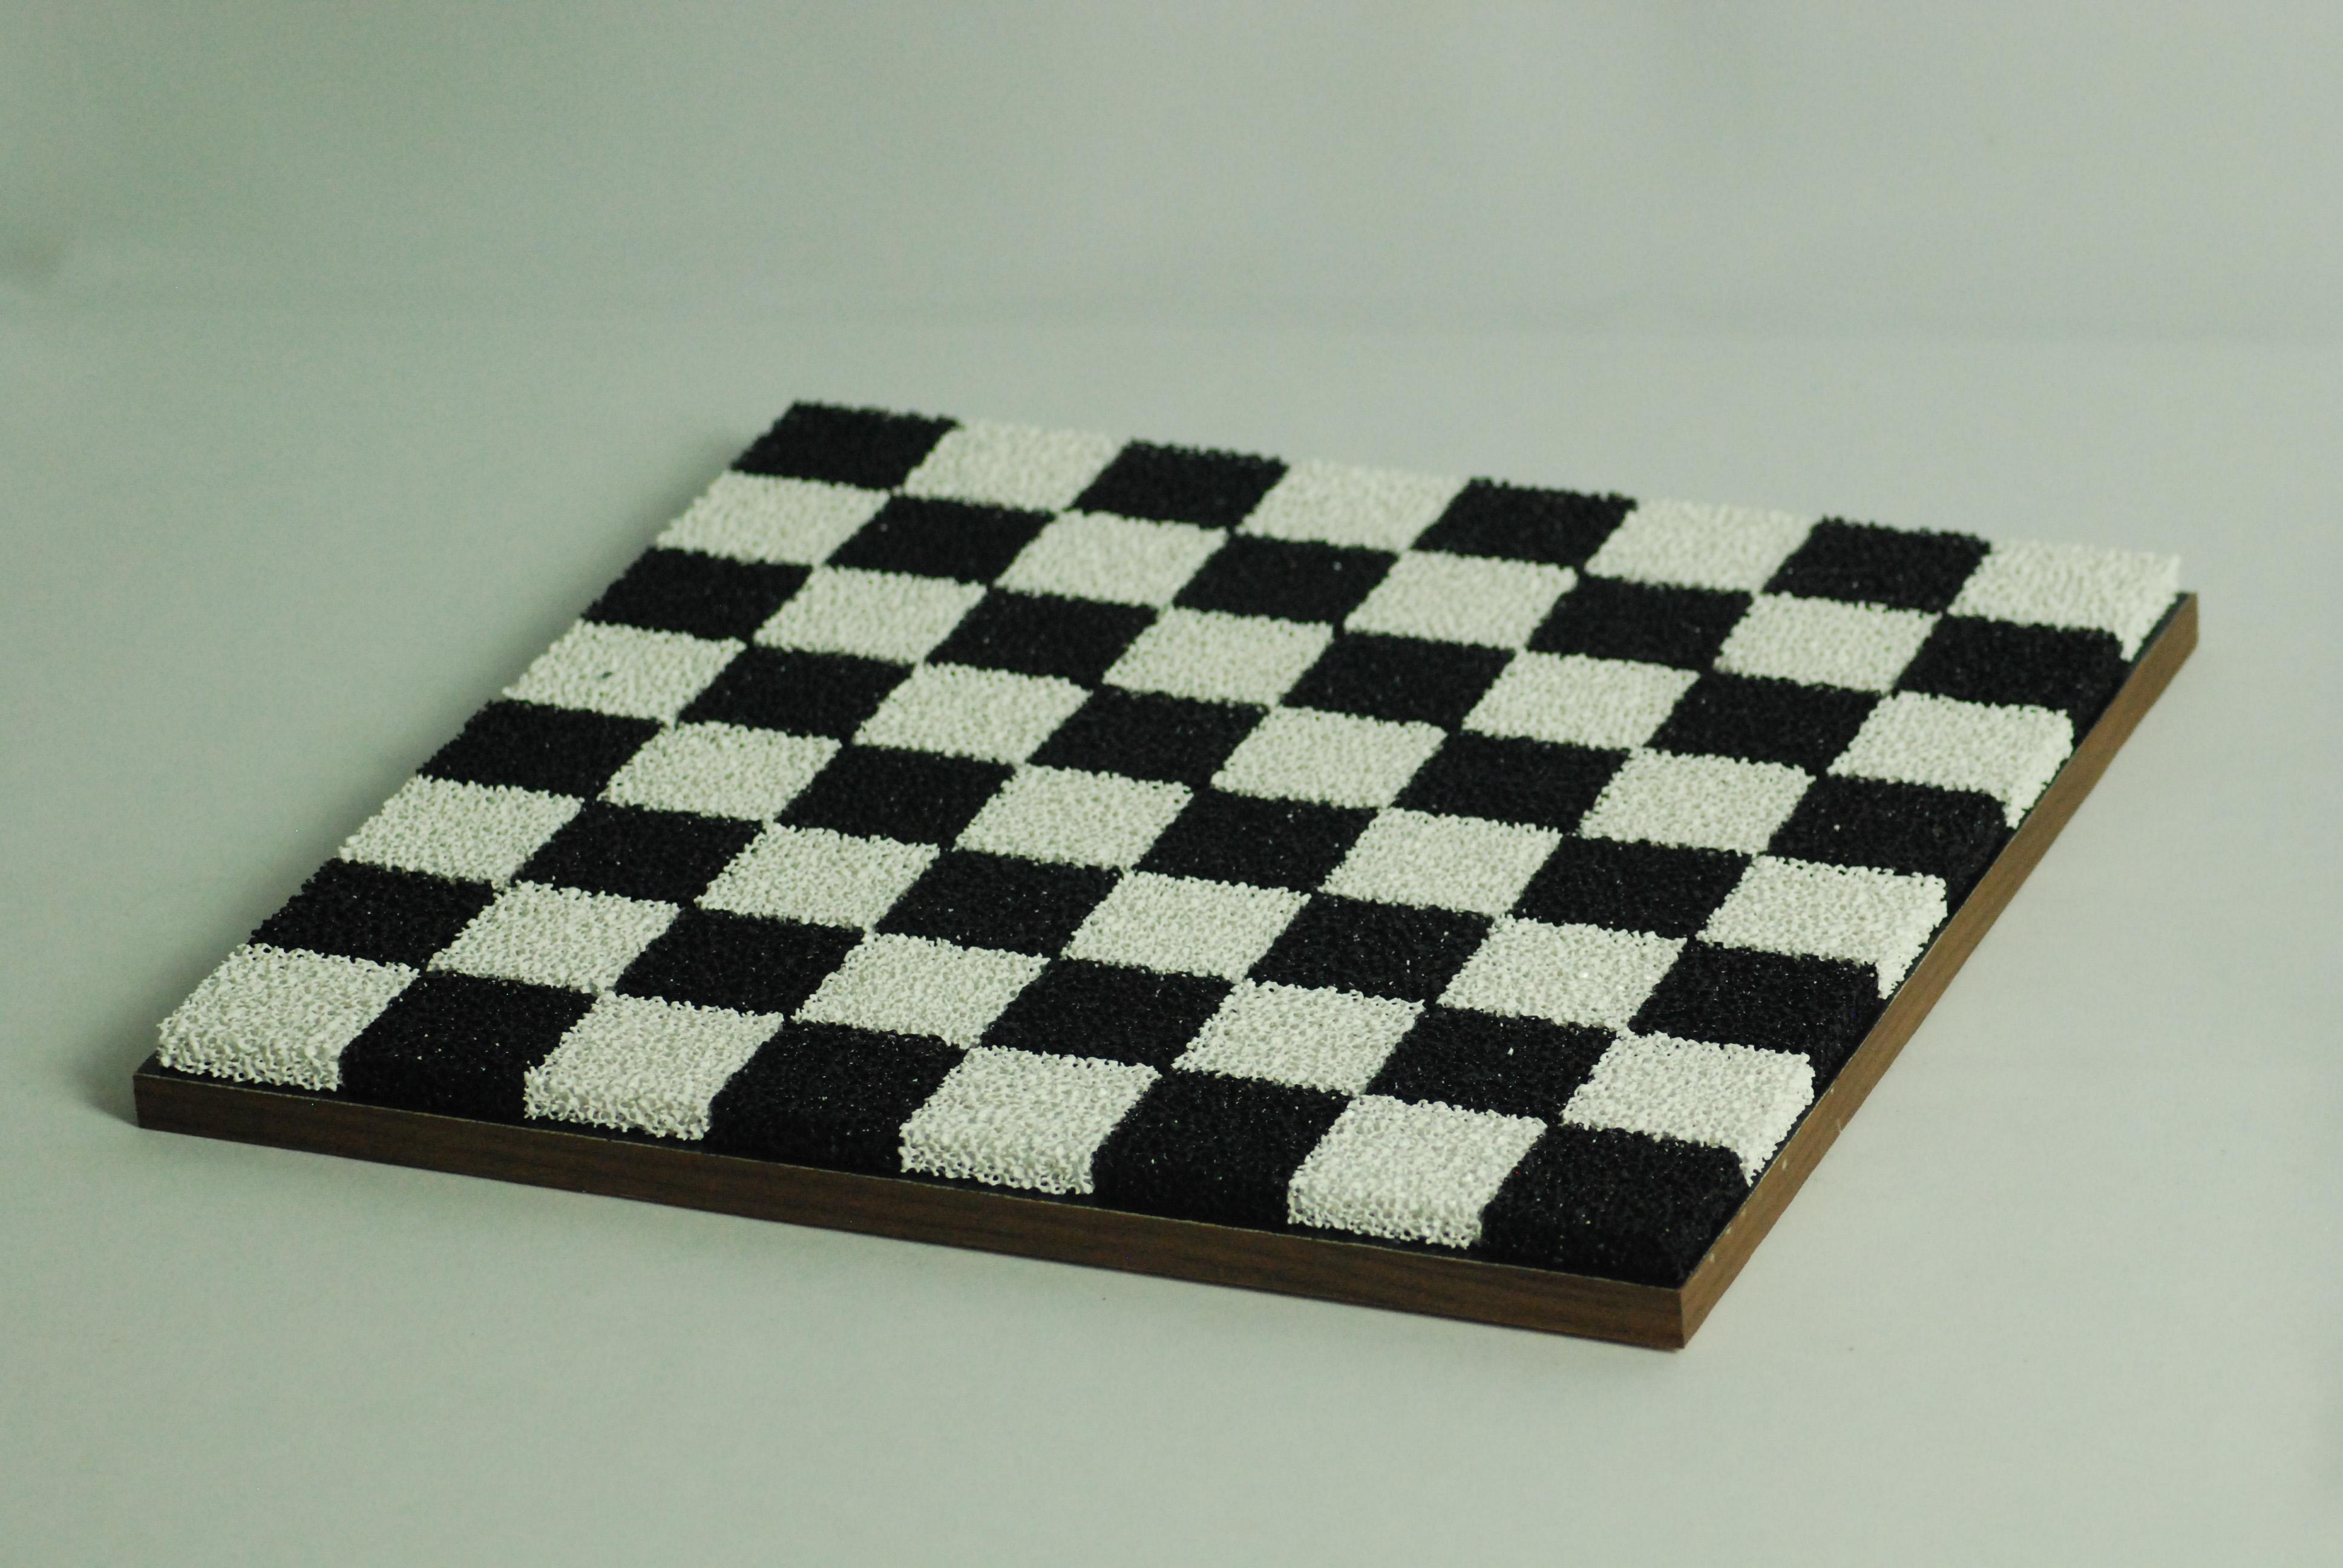 Hand-Carved Black + White Porous Ceramic Chess + Checkers Board, Wooden Pieces, Walnut Edge For Sale